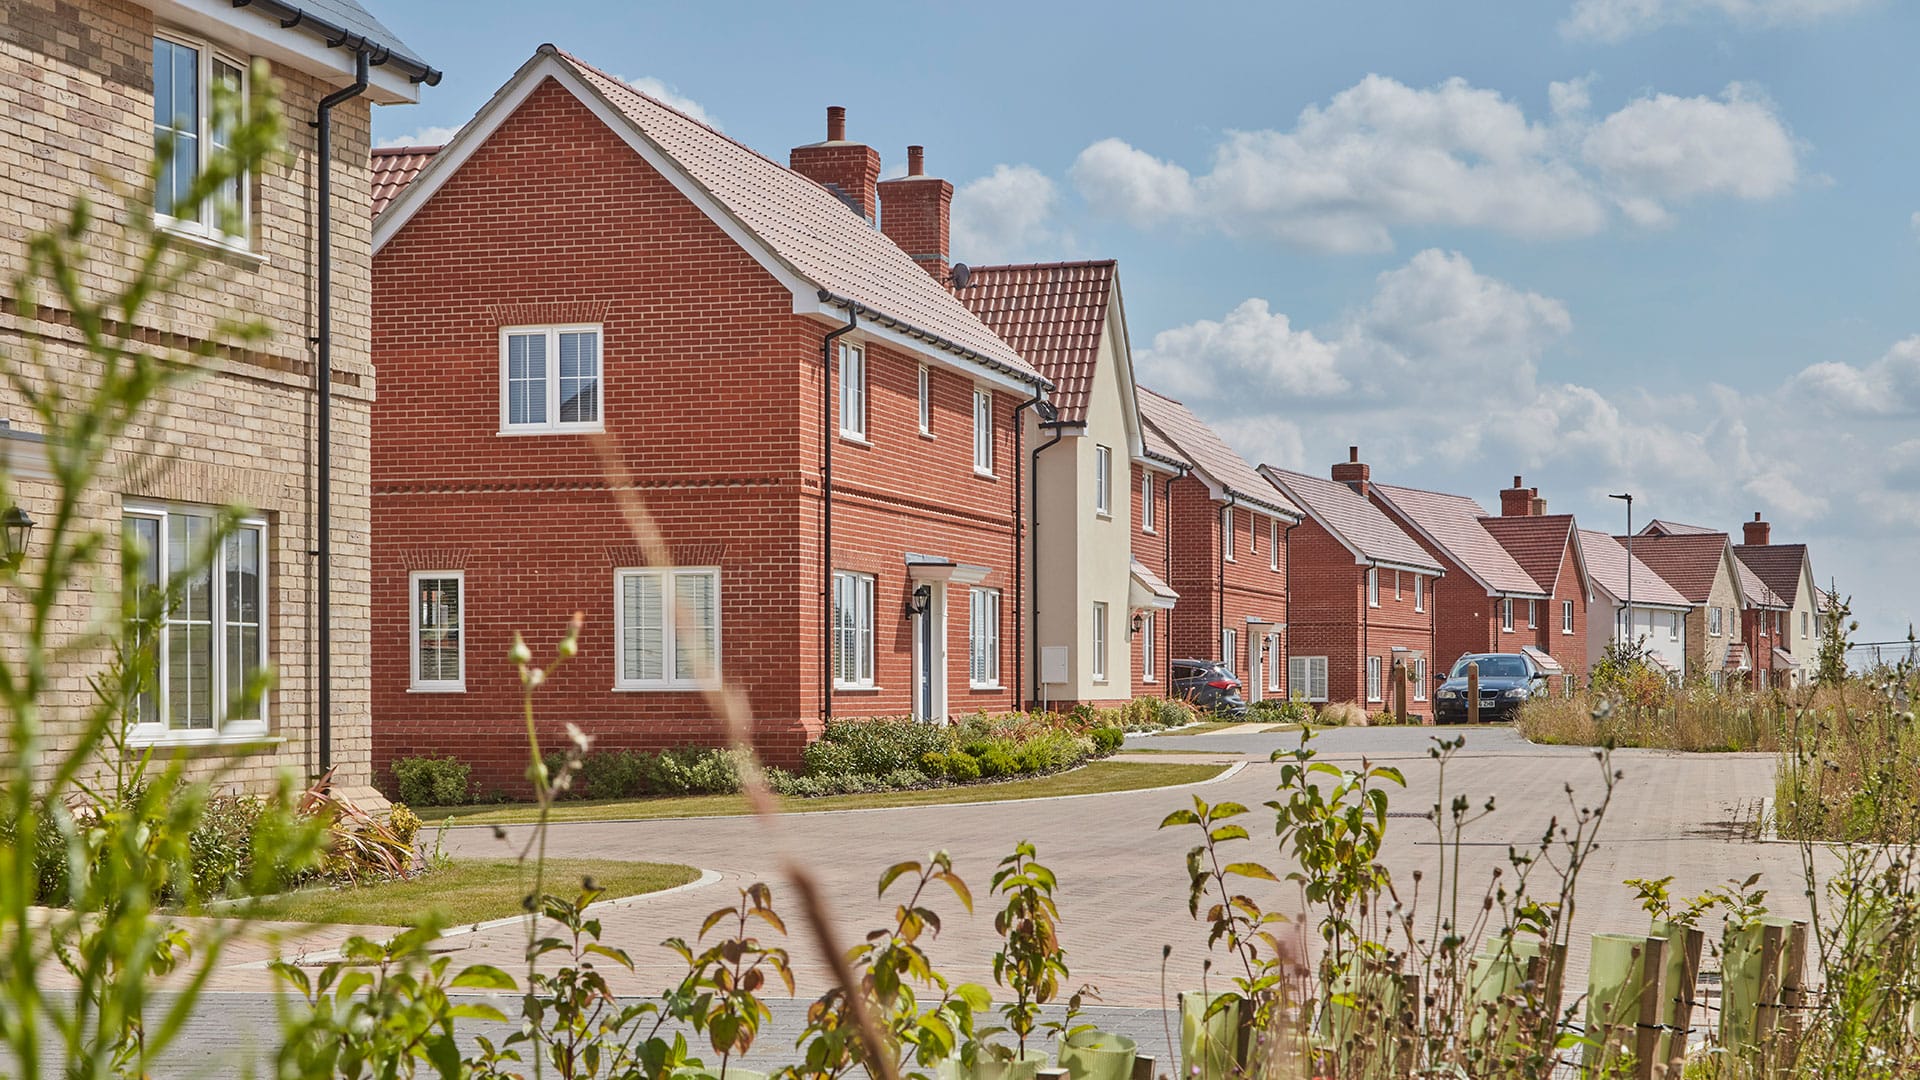 An external image of the Potters Warren development from Latimer by Clarion Housing Group - available to purchase through Shared Ownership on Share to Buy!